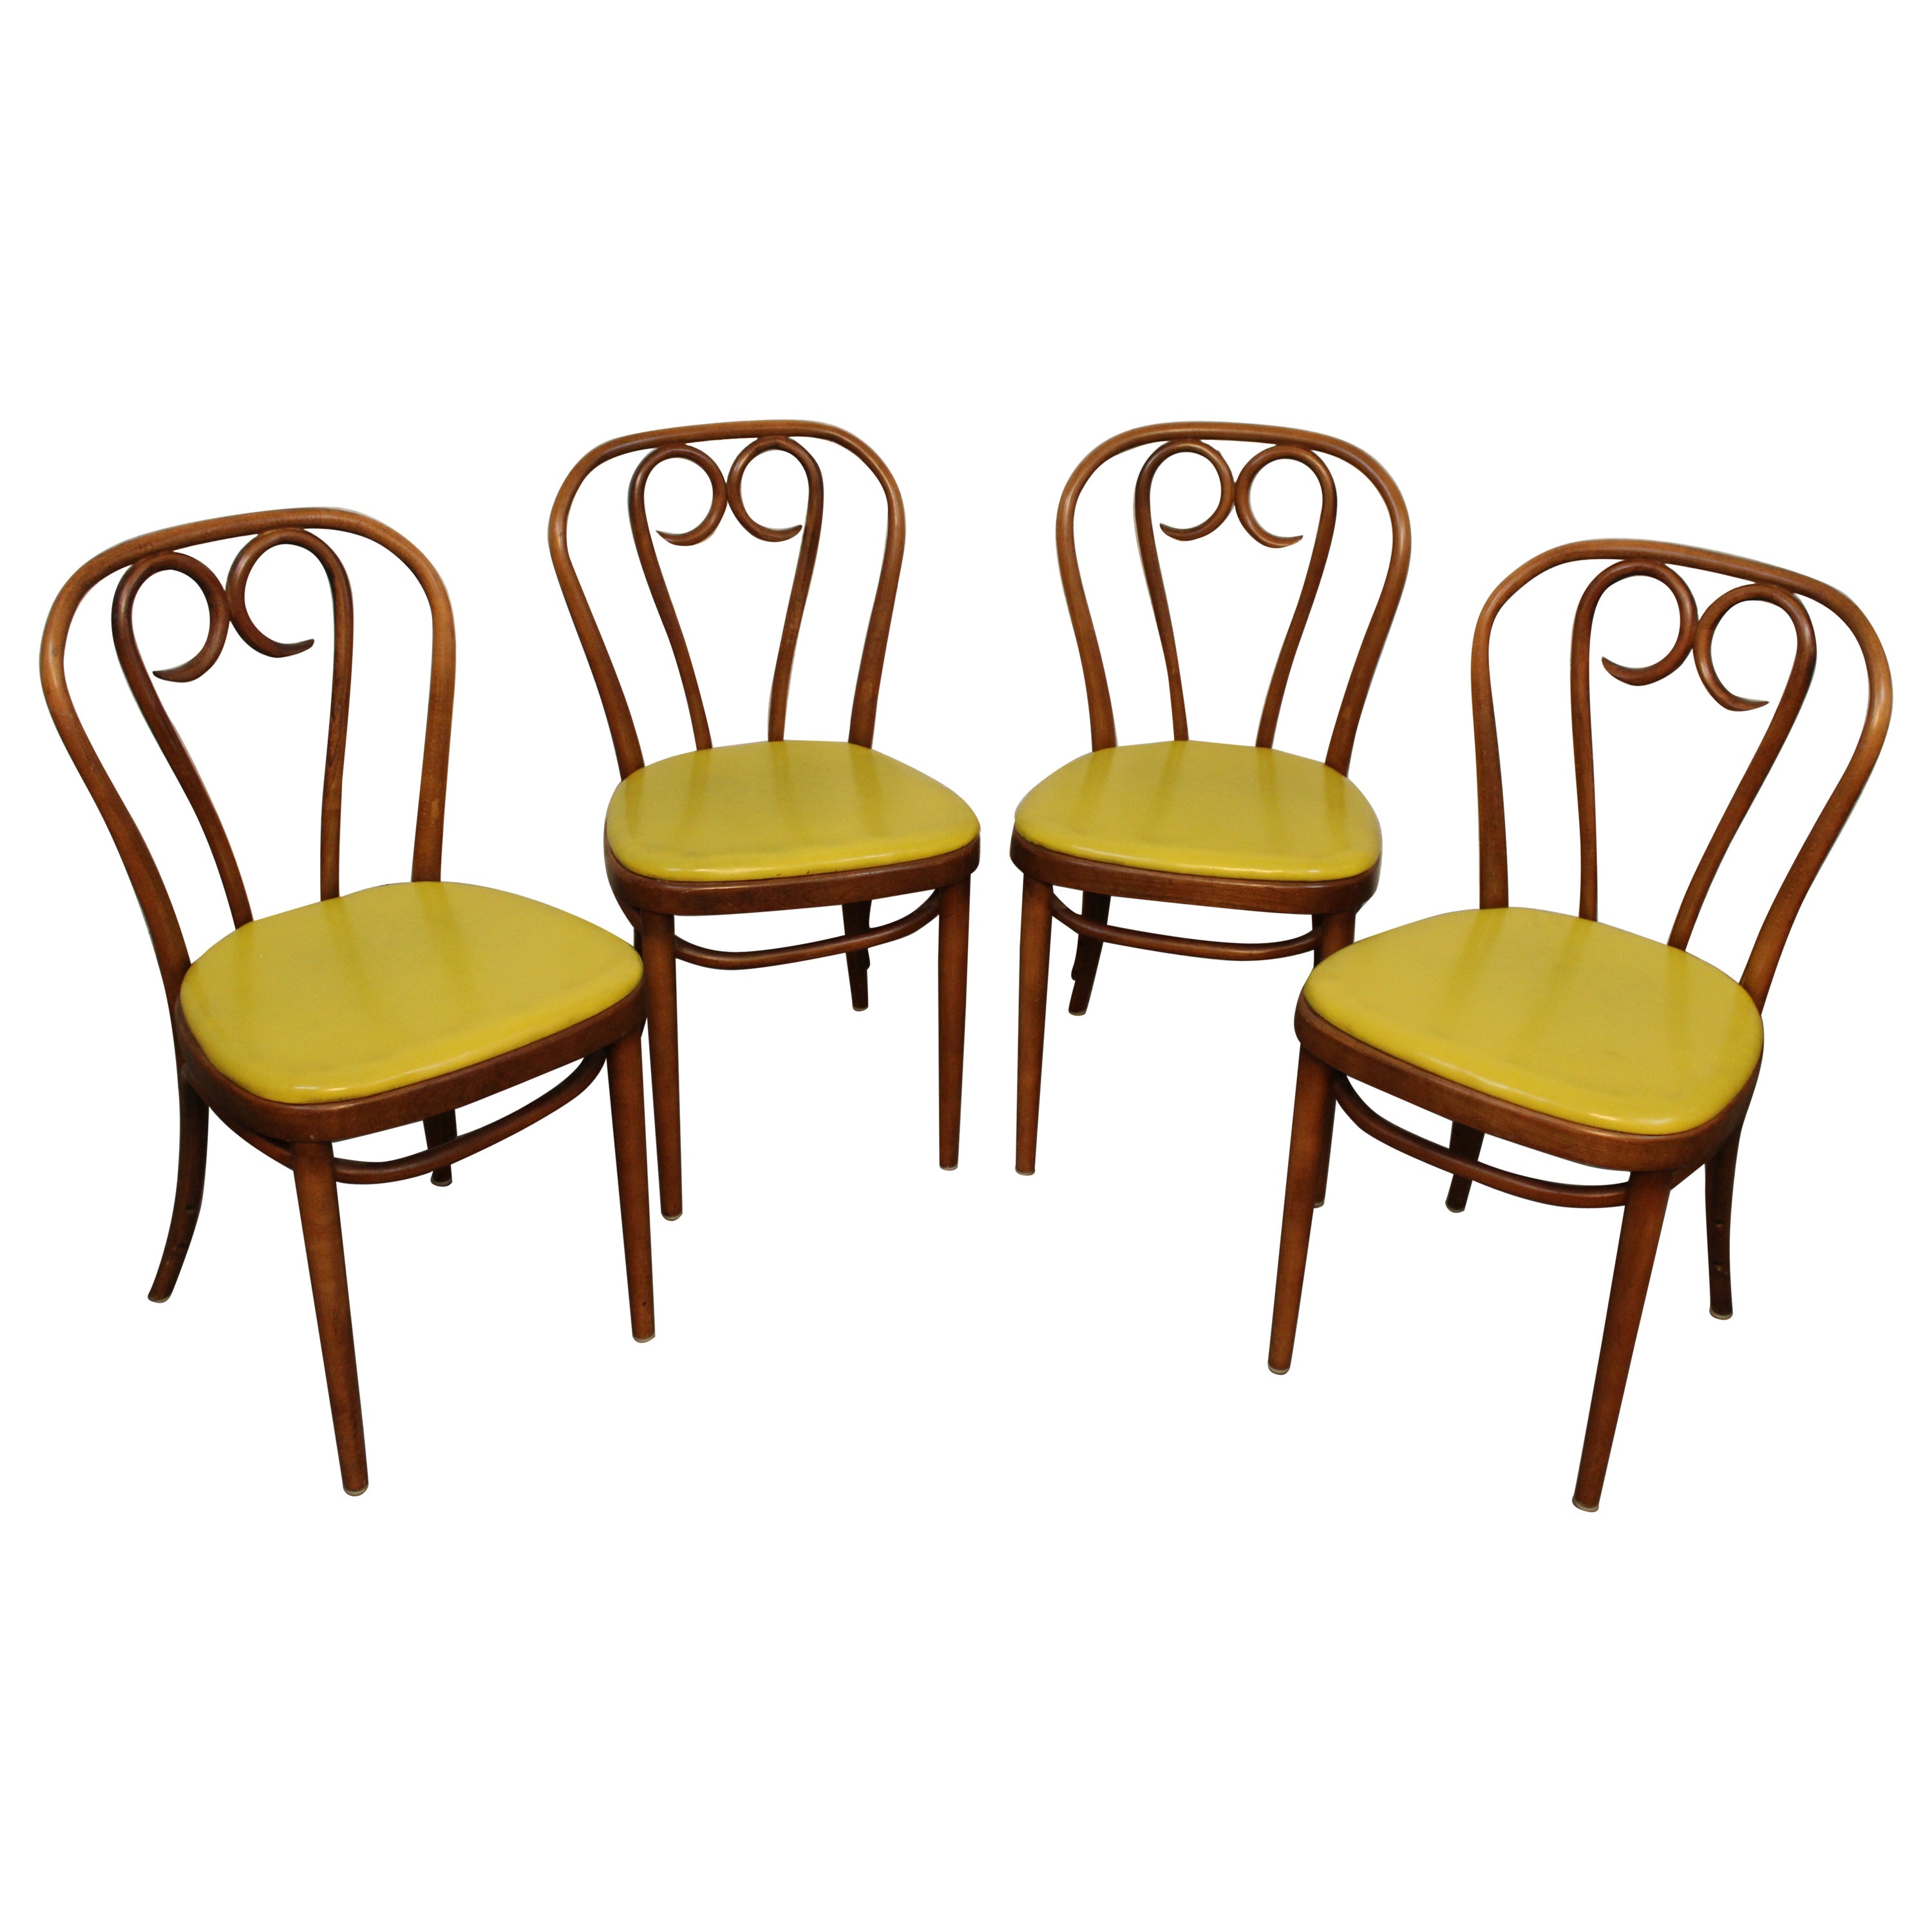 Vintage Mustard Leatherette Bentwood Bistro Chairs after Thonet